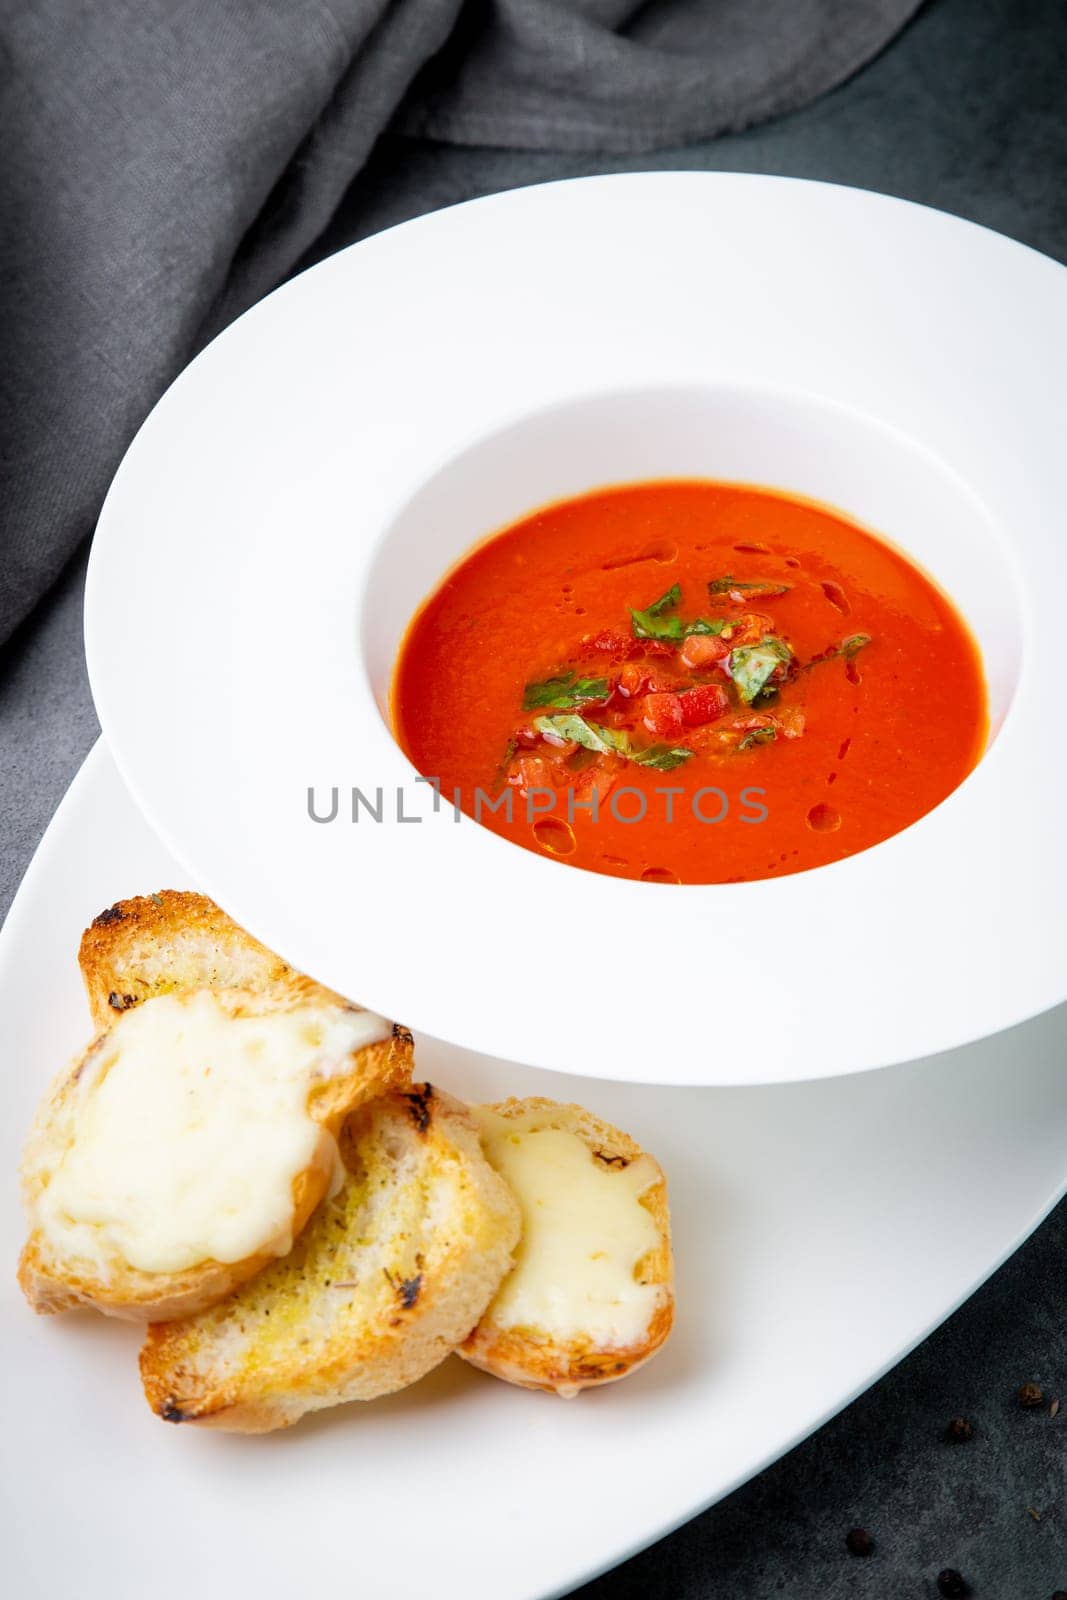 red tomato cream soup with herbs and toasted bread